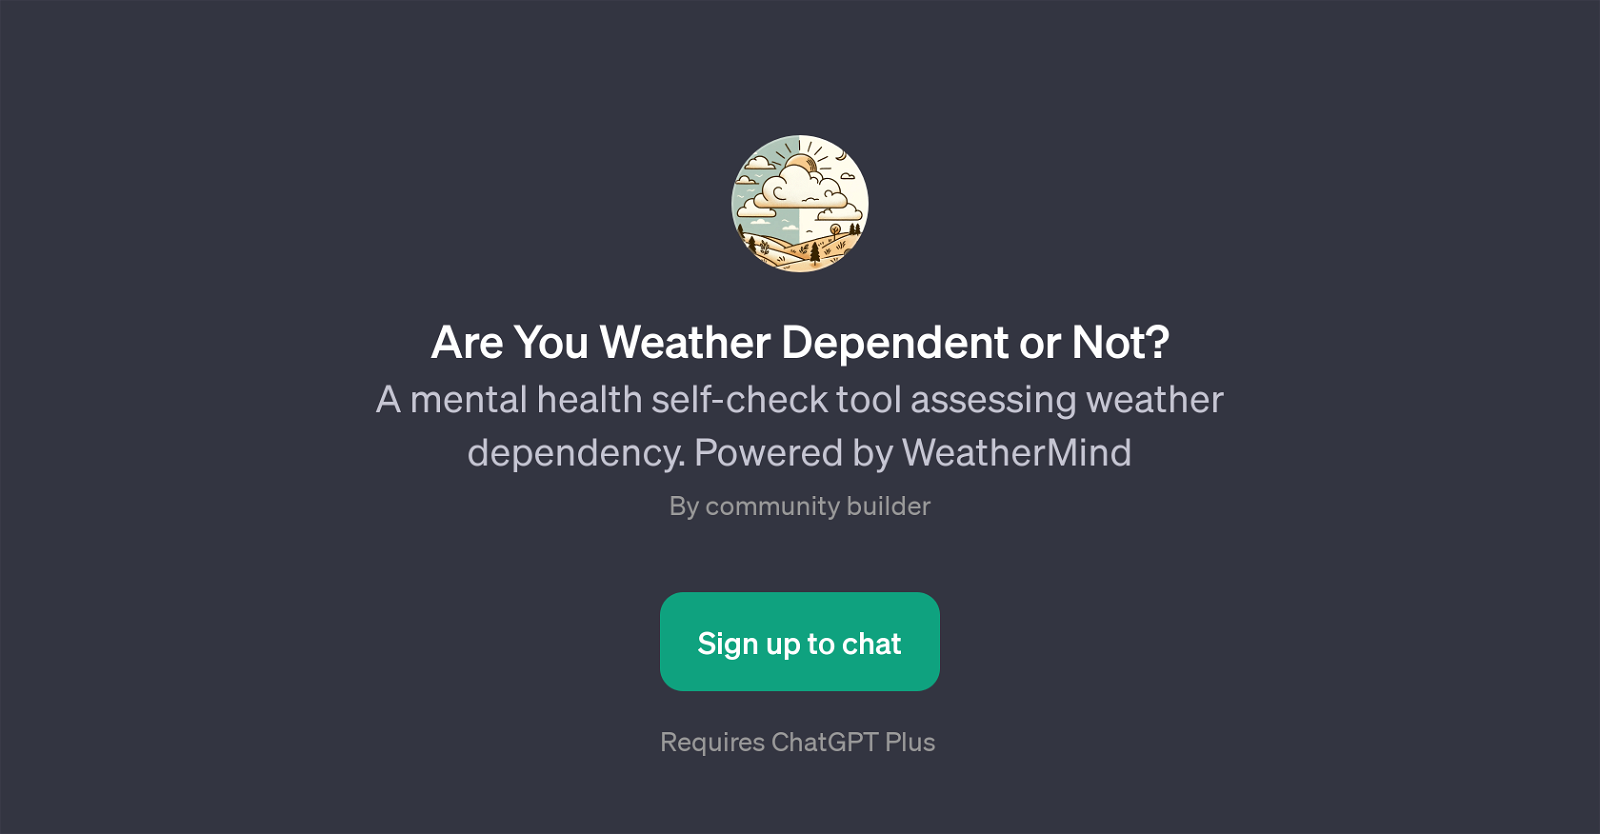 Are You Weather Dependent or Not? website